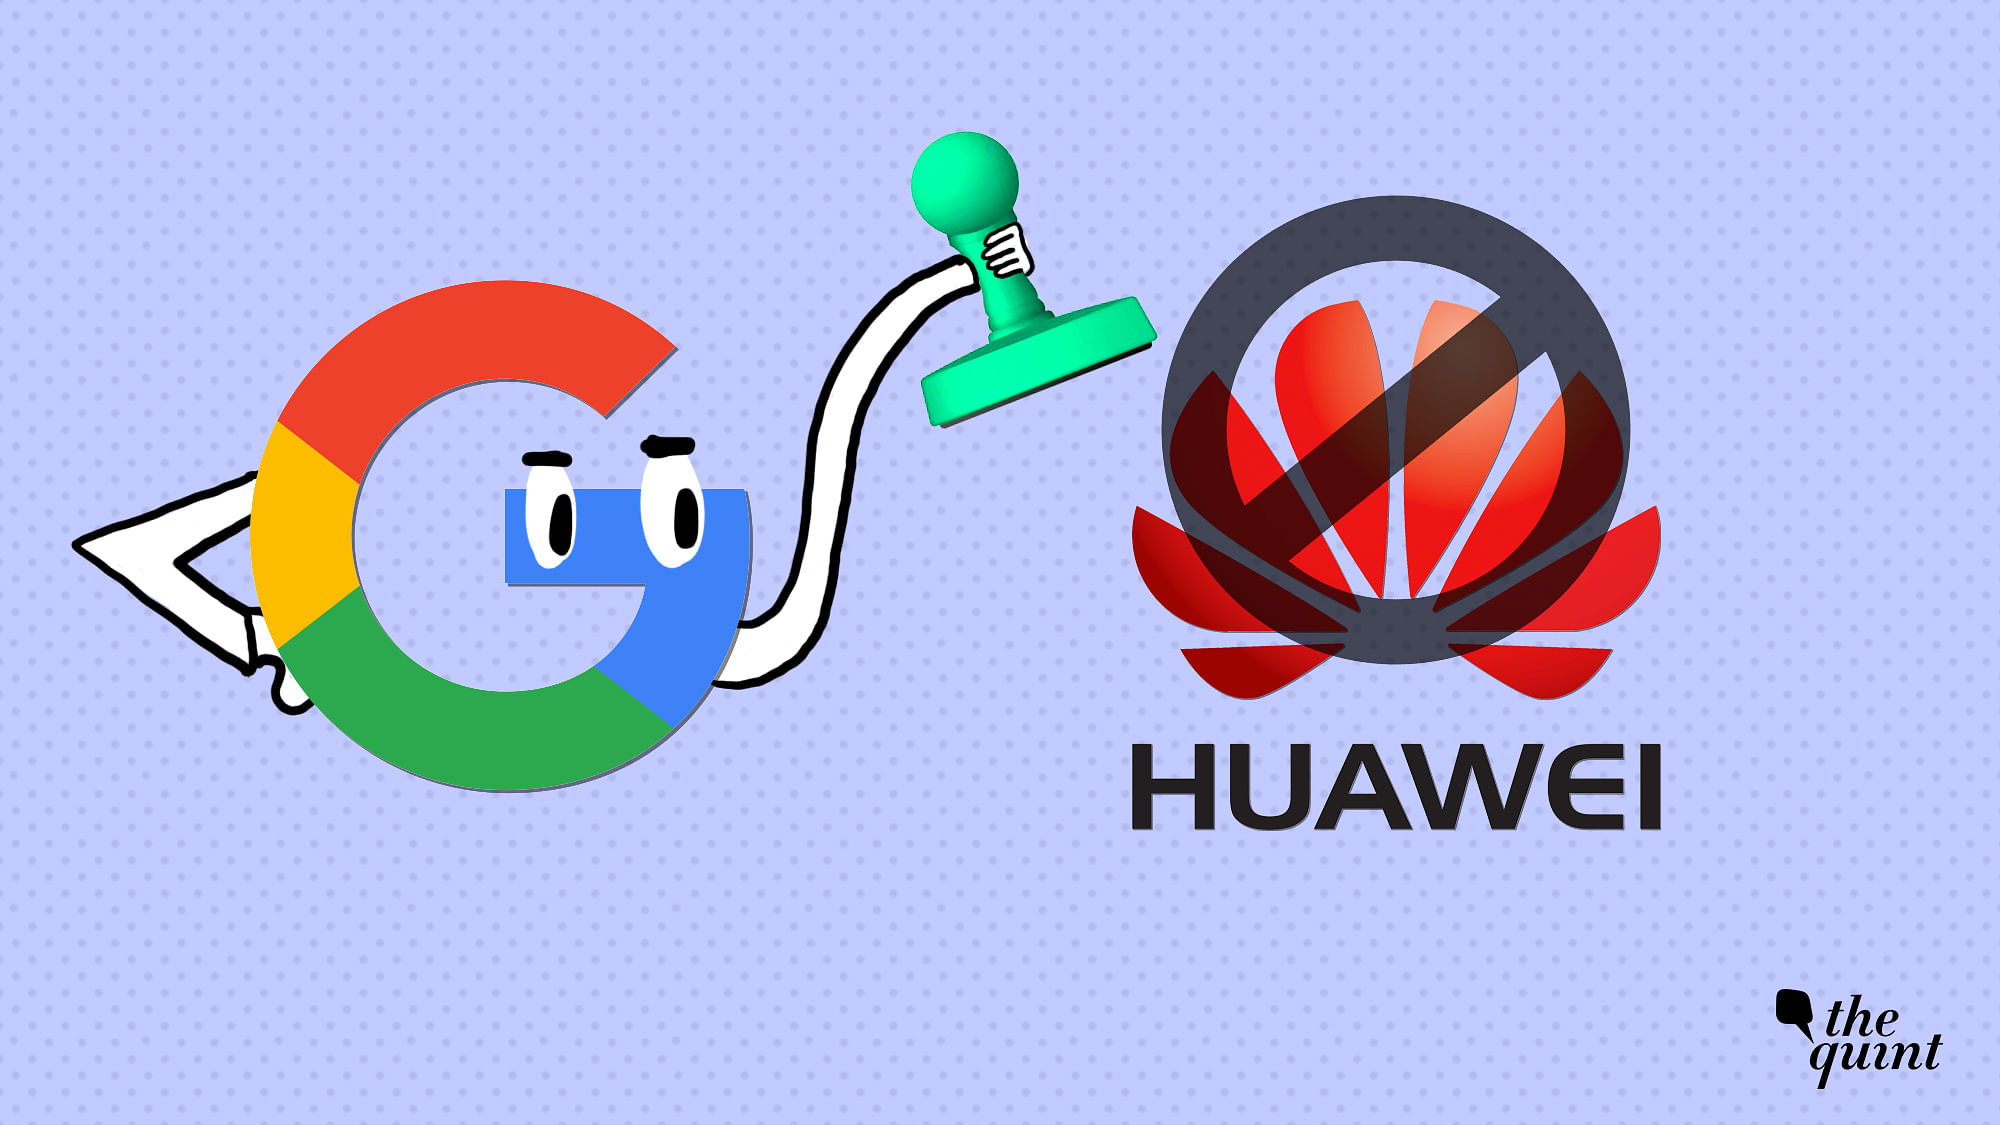 Google has ended support for Huawei devices globally.